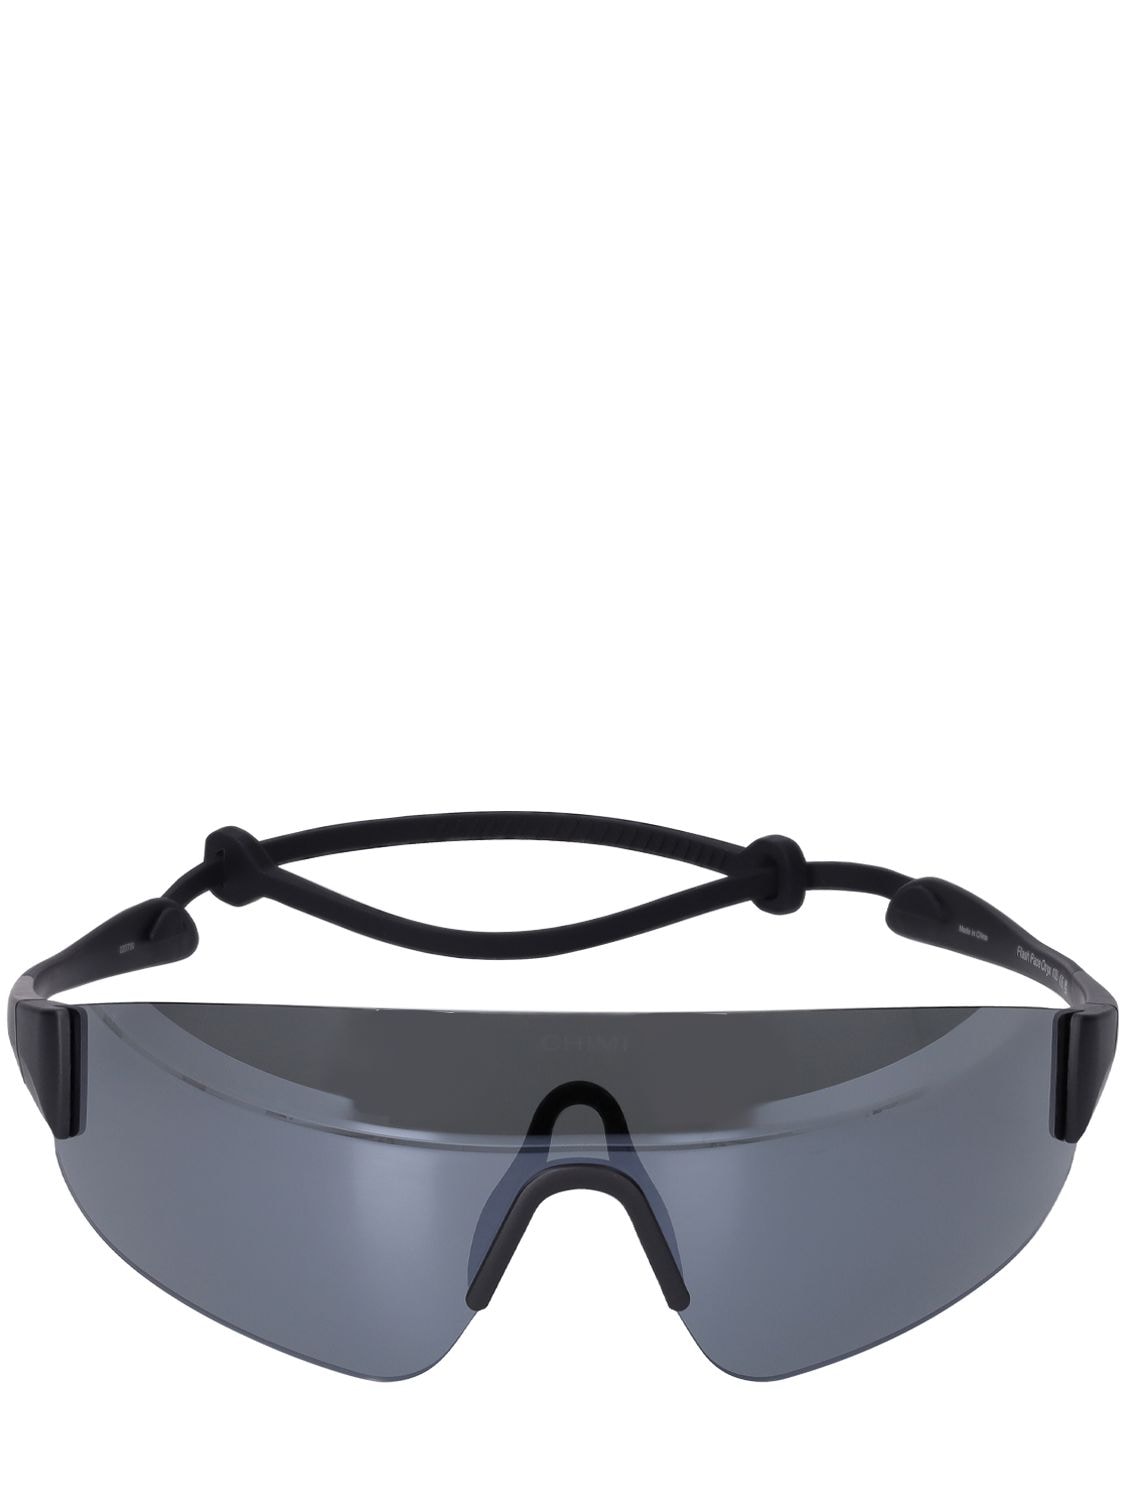 Chimi Pace Onyx Mask Sunglasses In Black